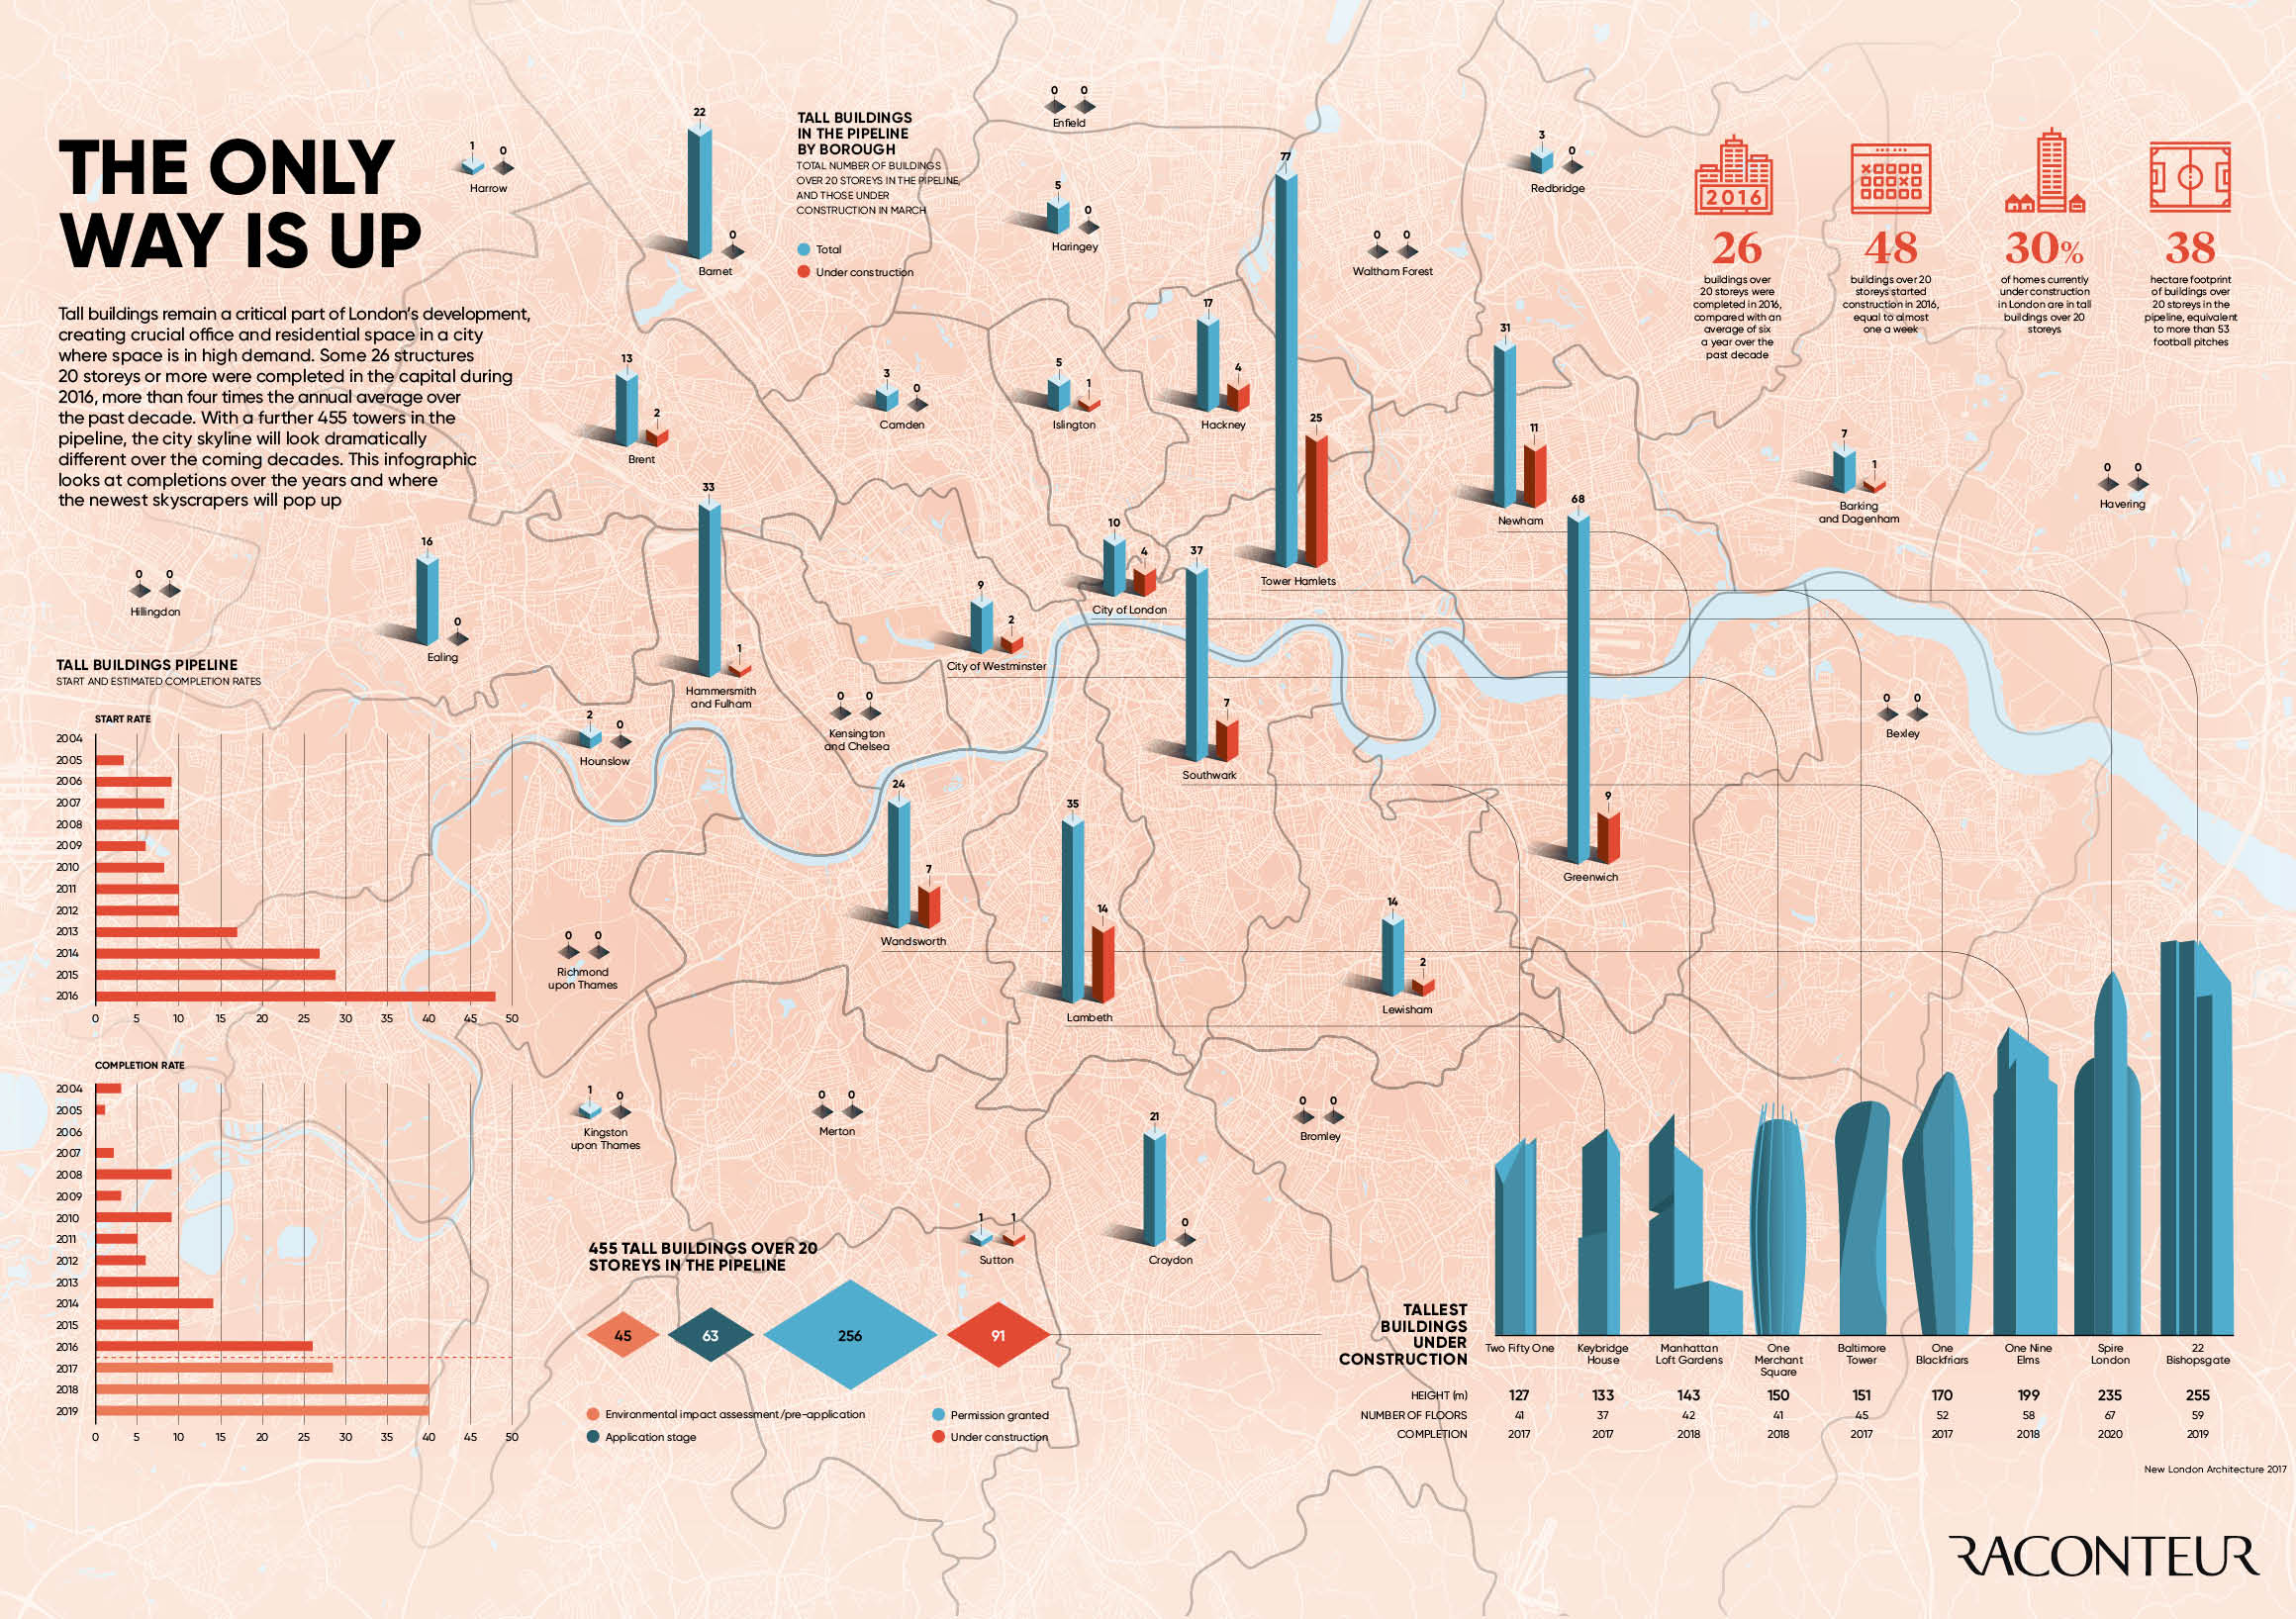 This infographic looks at completions over the years and where newest skyscrapers will pop up